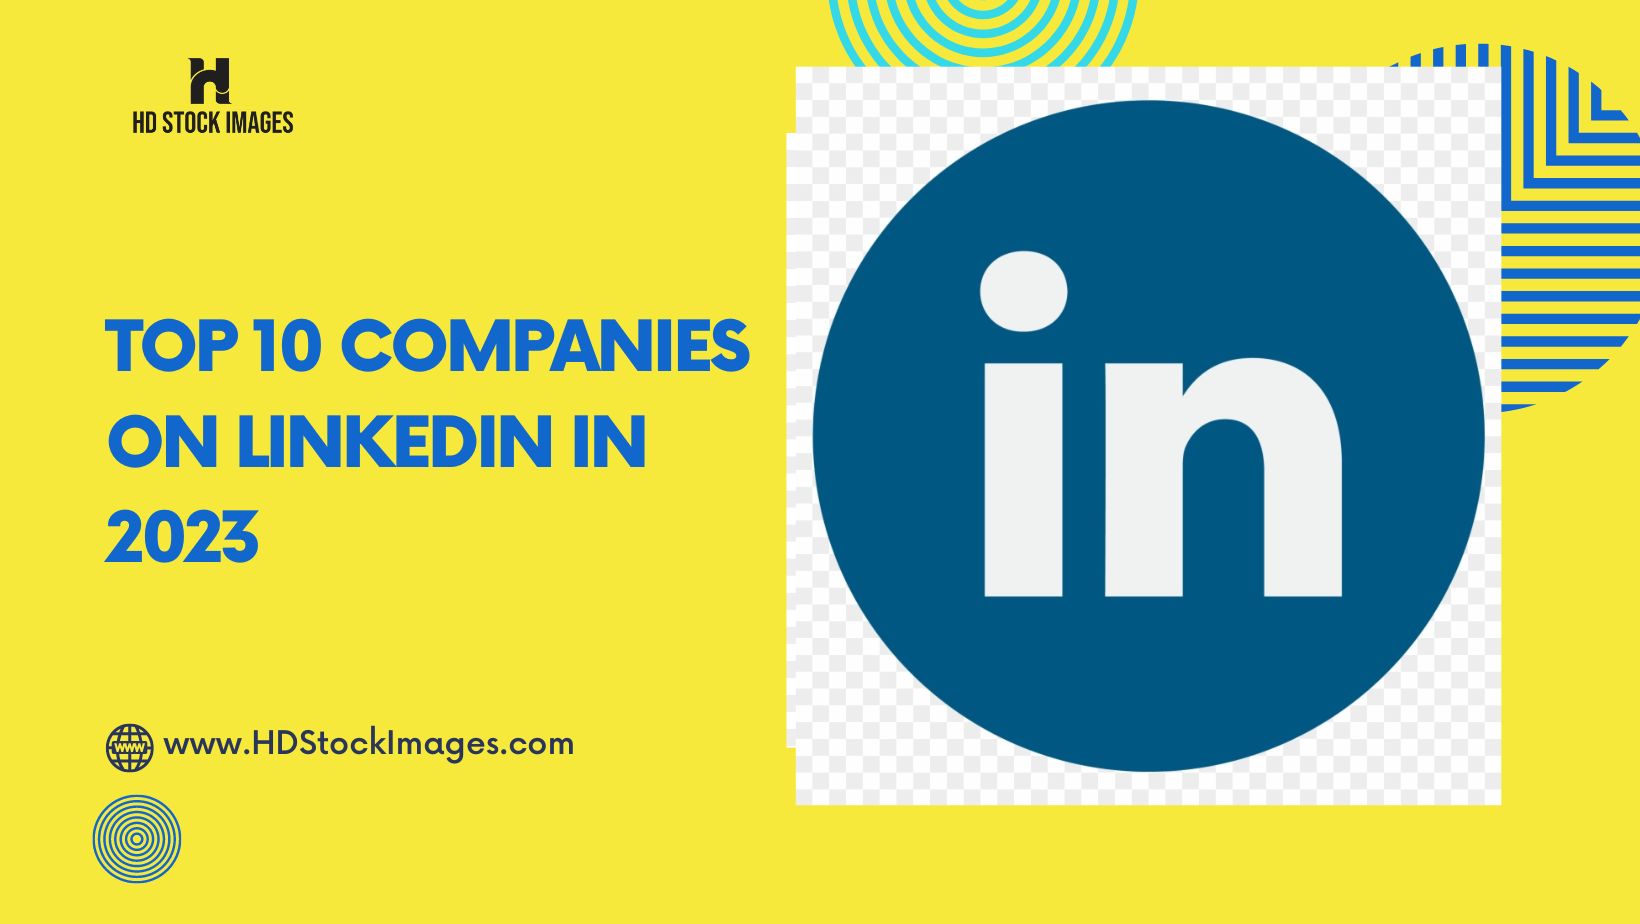 An image of Top 10 Companies on Linkedin in 2023